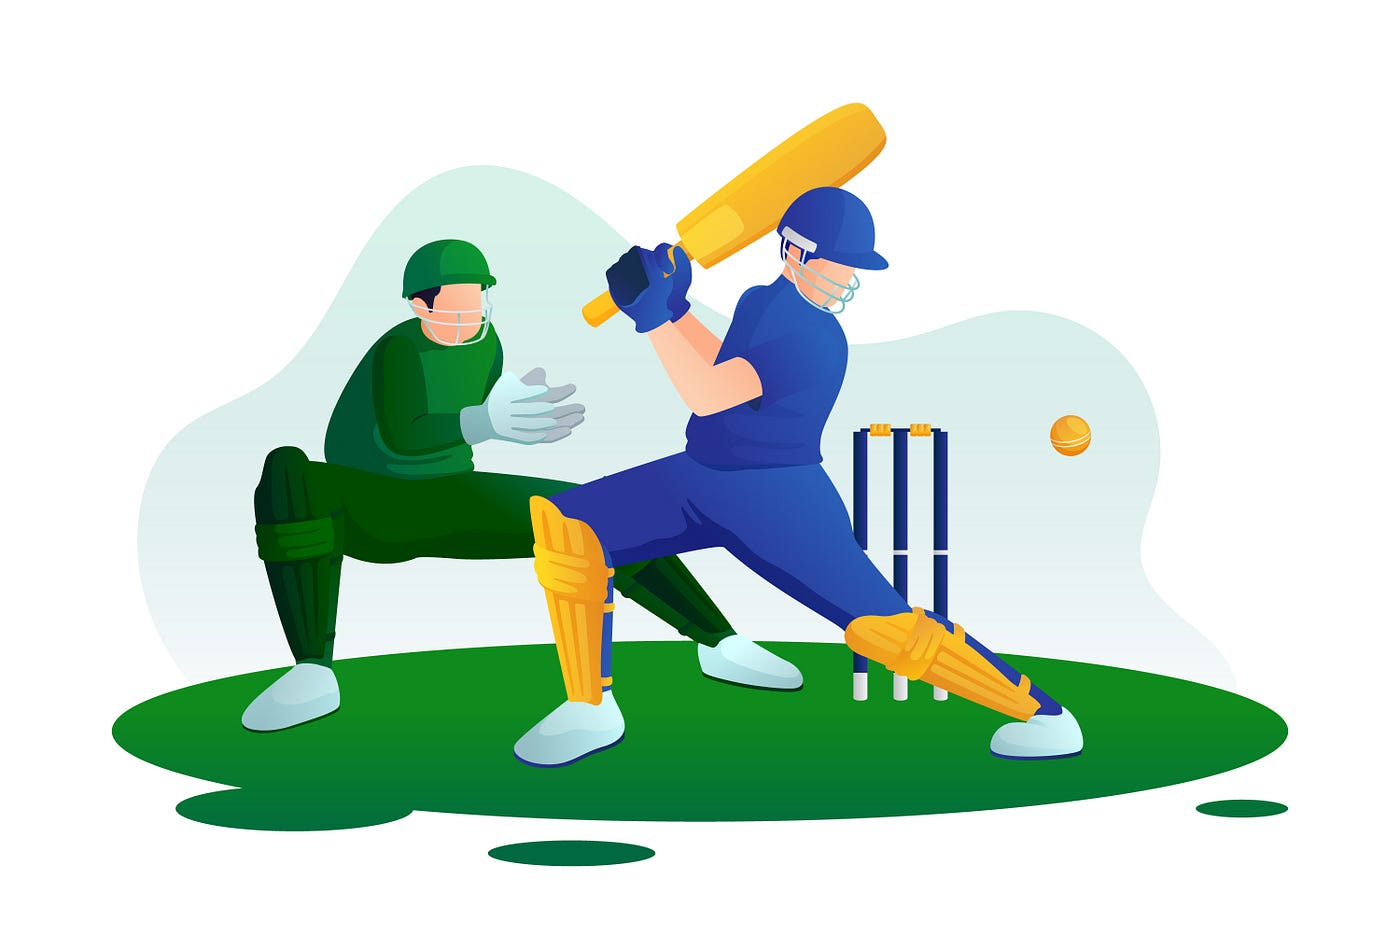 Essential Considerations When Using an Online Cricket ID